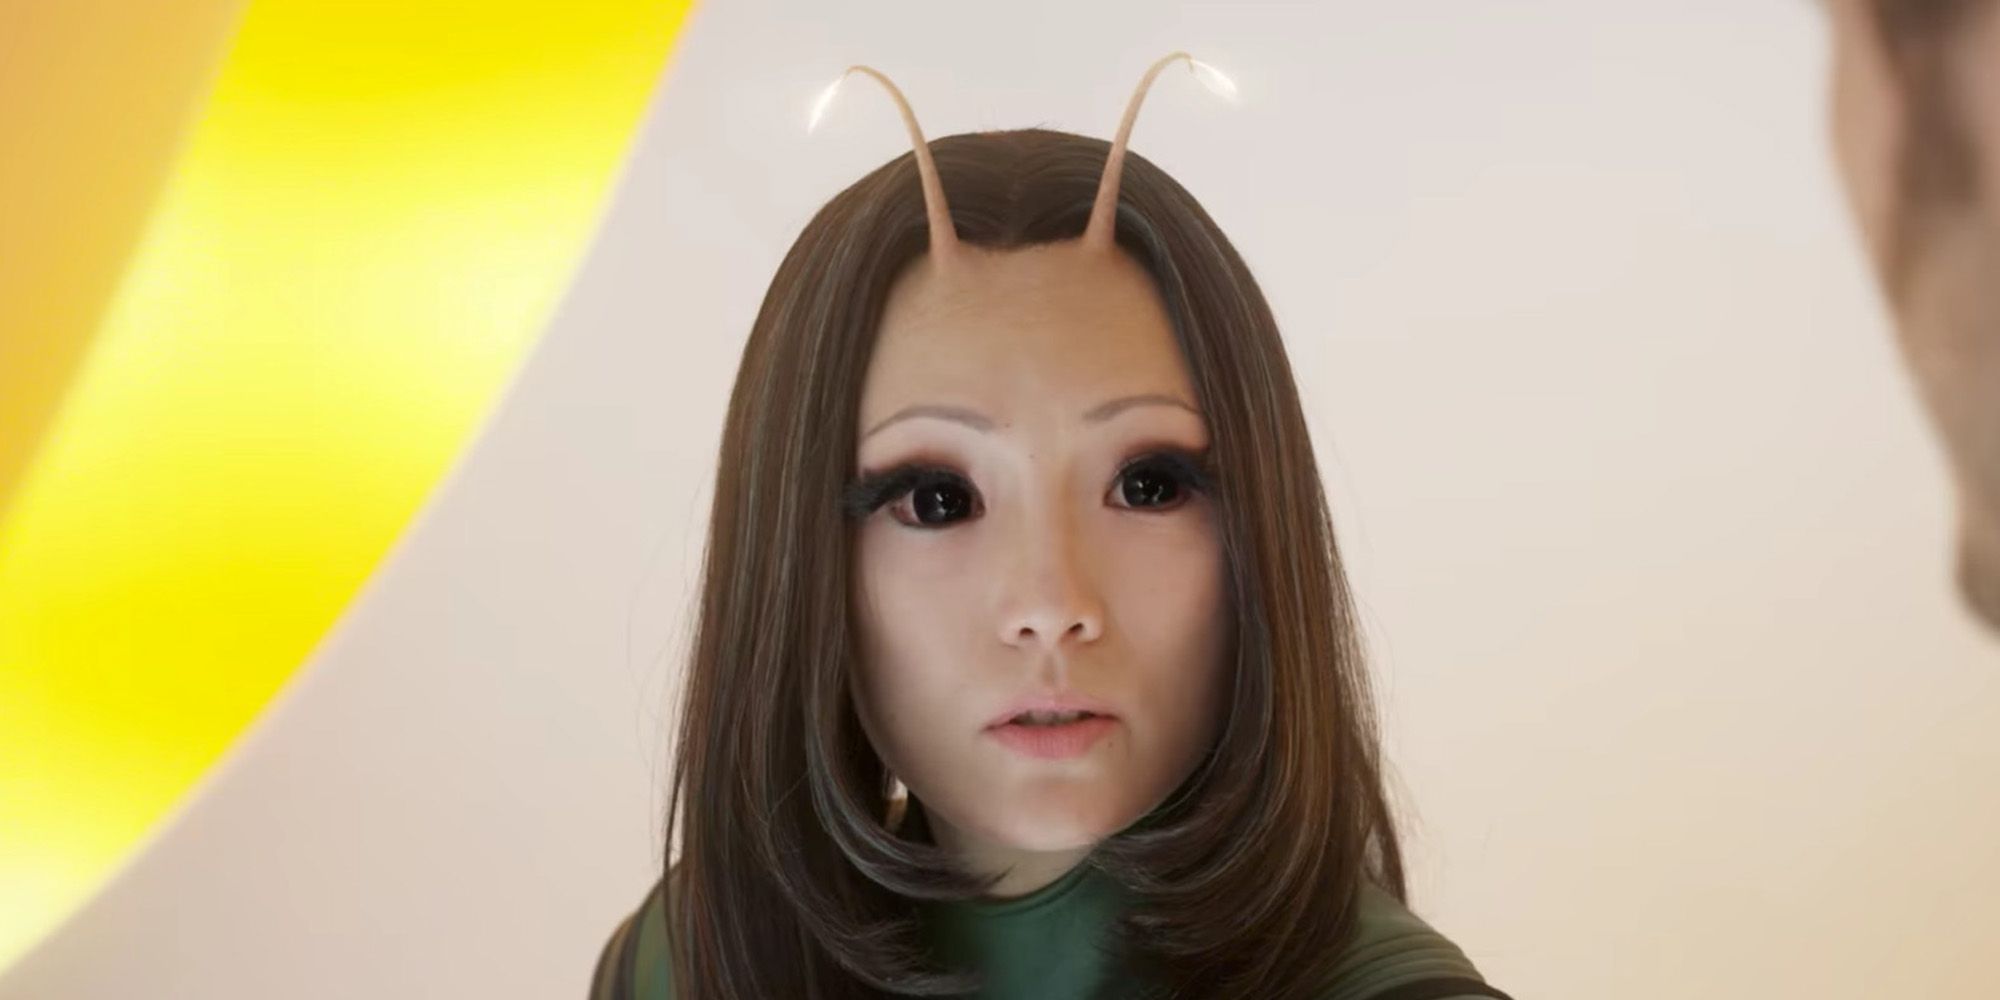 Mantis looking at someone off-camera in Guardians of the Galaxy Vol. 2